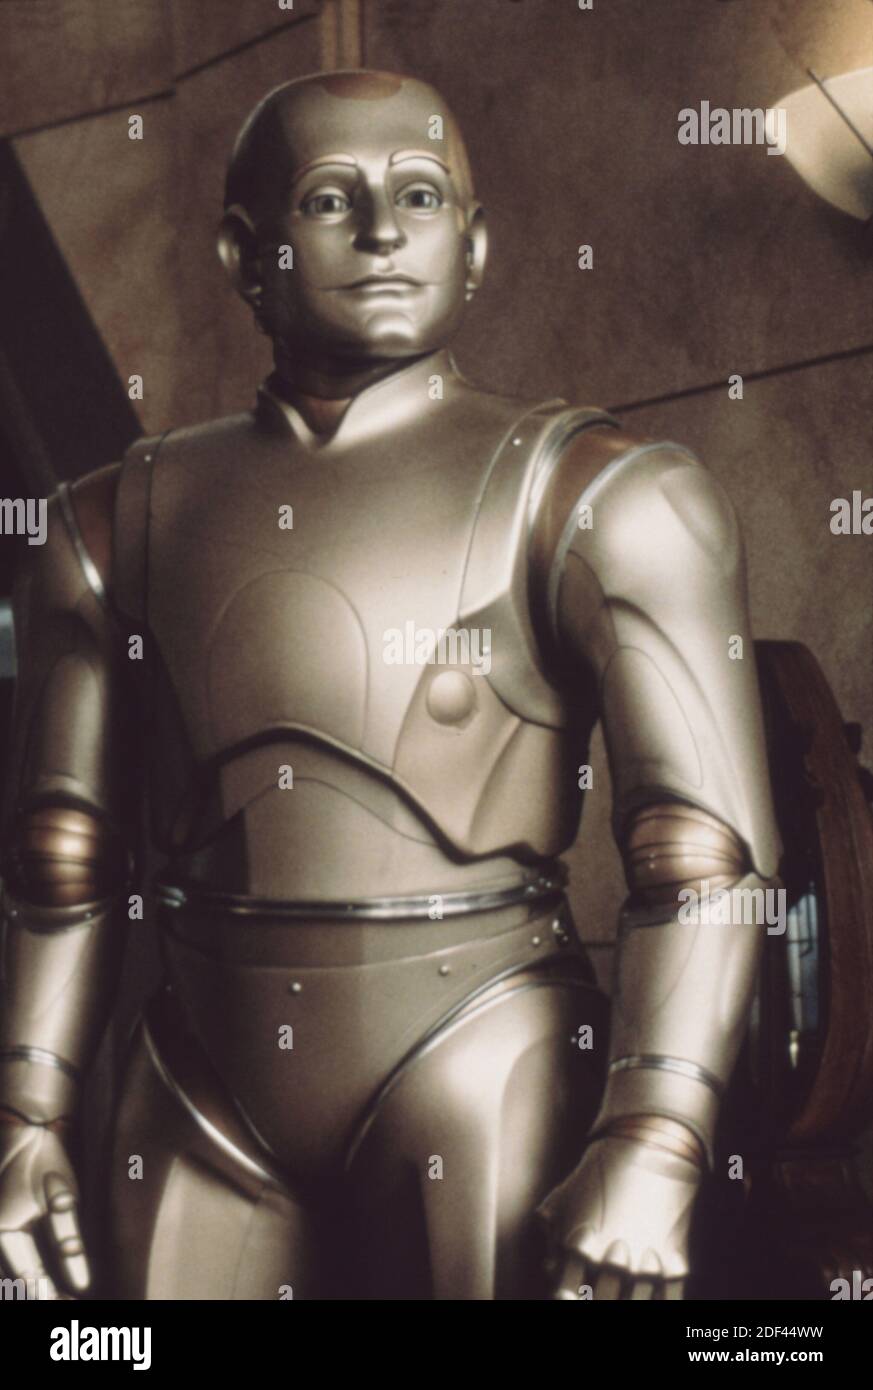 ROBIN WILLIAMS dans BICENTENNIAL MAN, 1999 TouchstonePictures/Columbia Pictures Banque D'Images